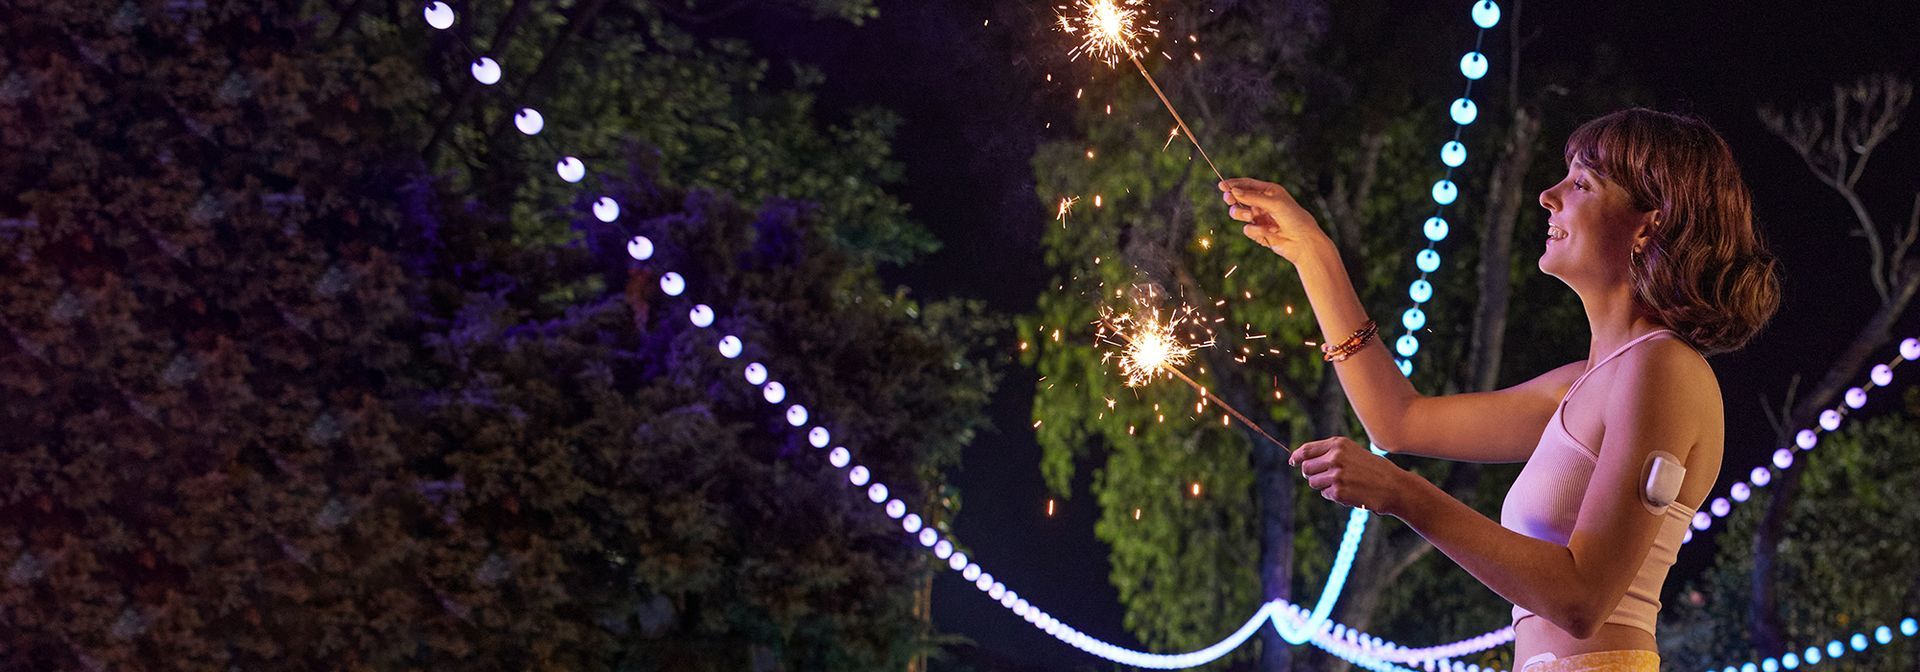 woman with sparklers